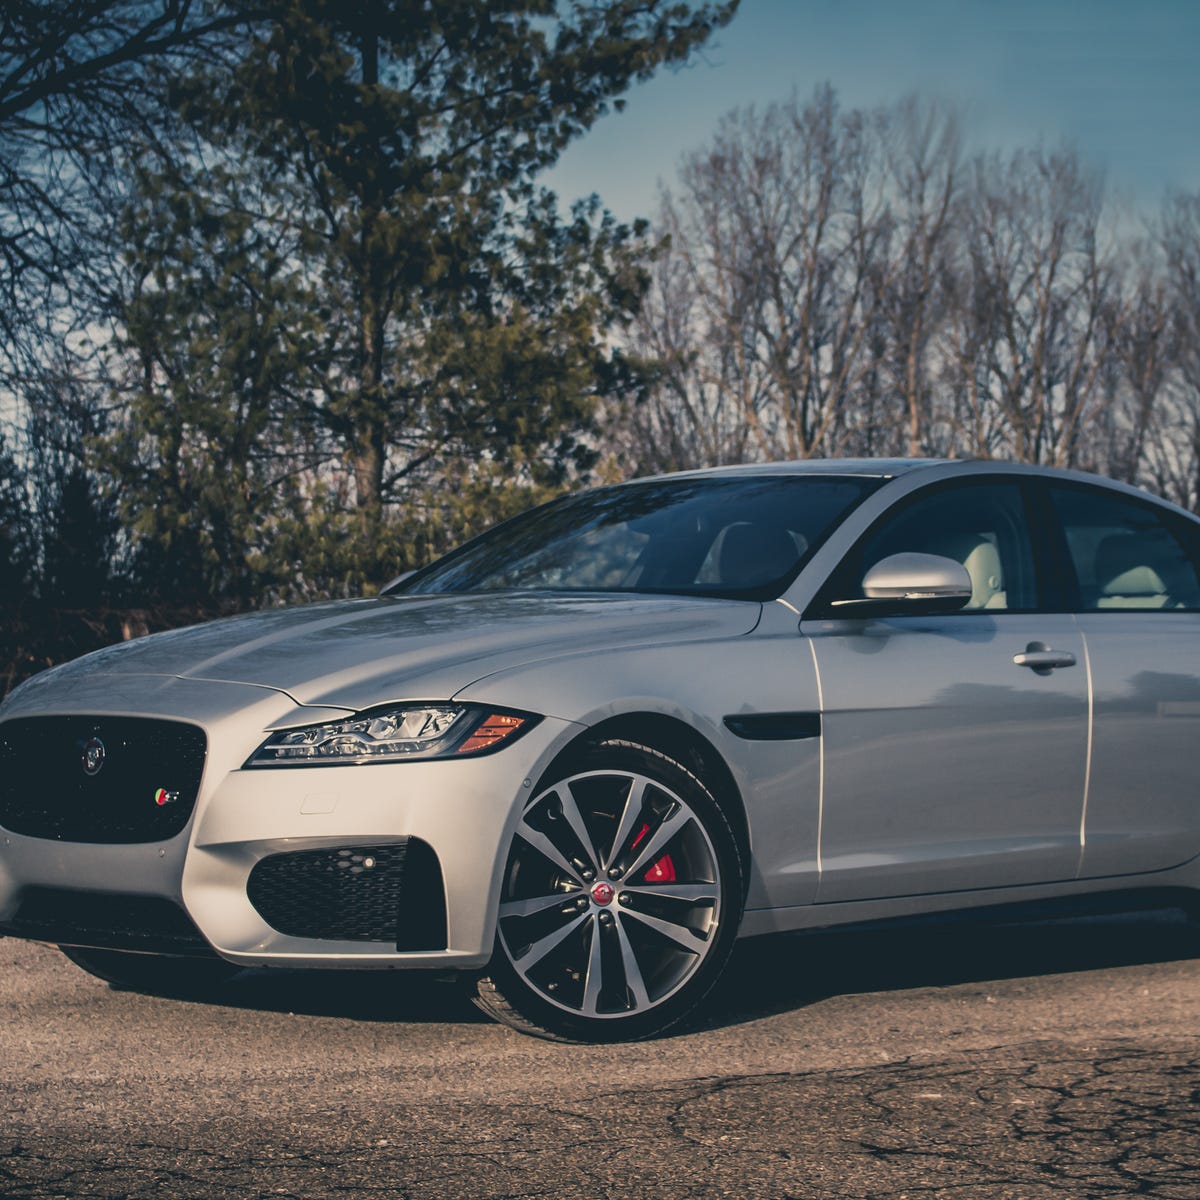 2017 Jaguar XF review: Supercharged V6, sharp handling and tech-rich cabin  combine to challenge BMW, Audi - CNET